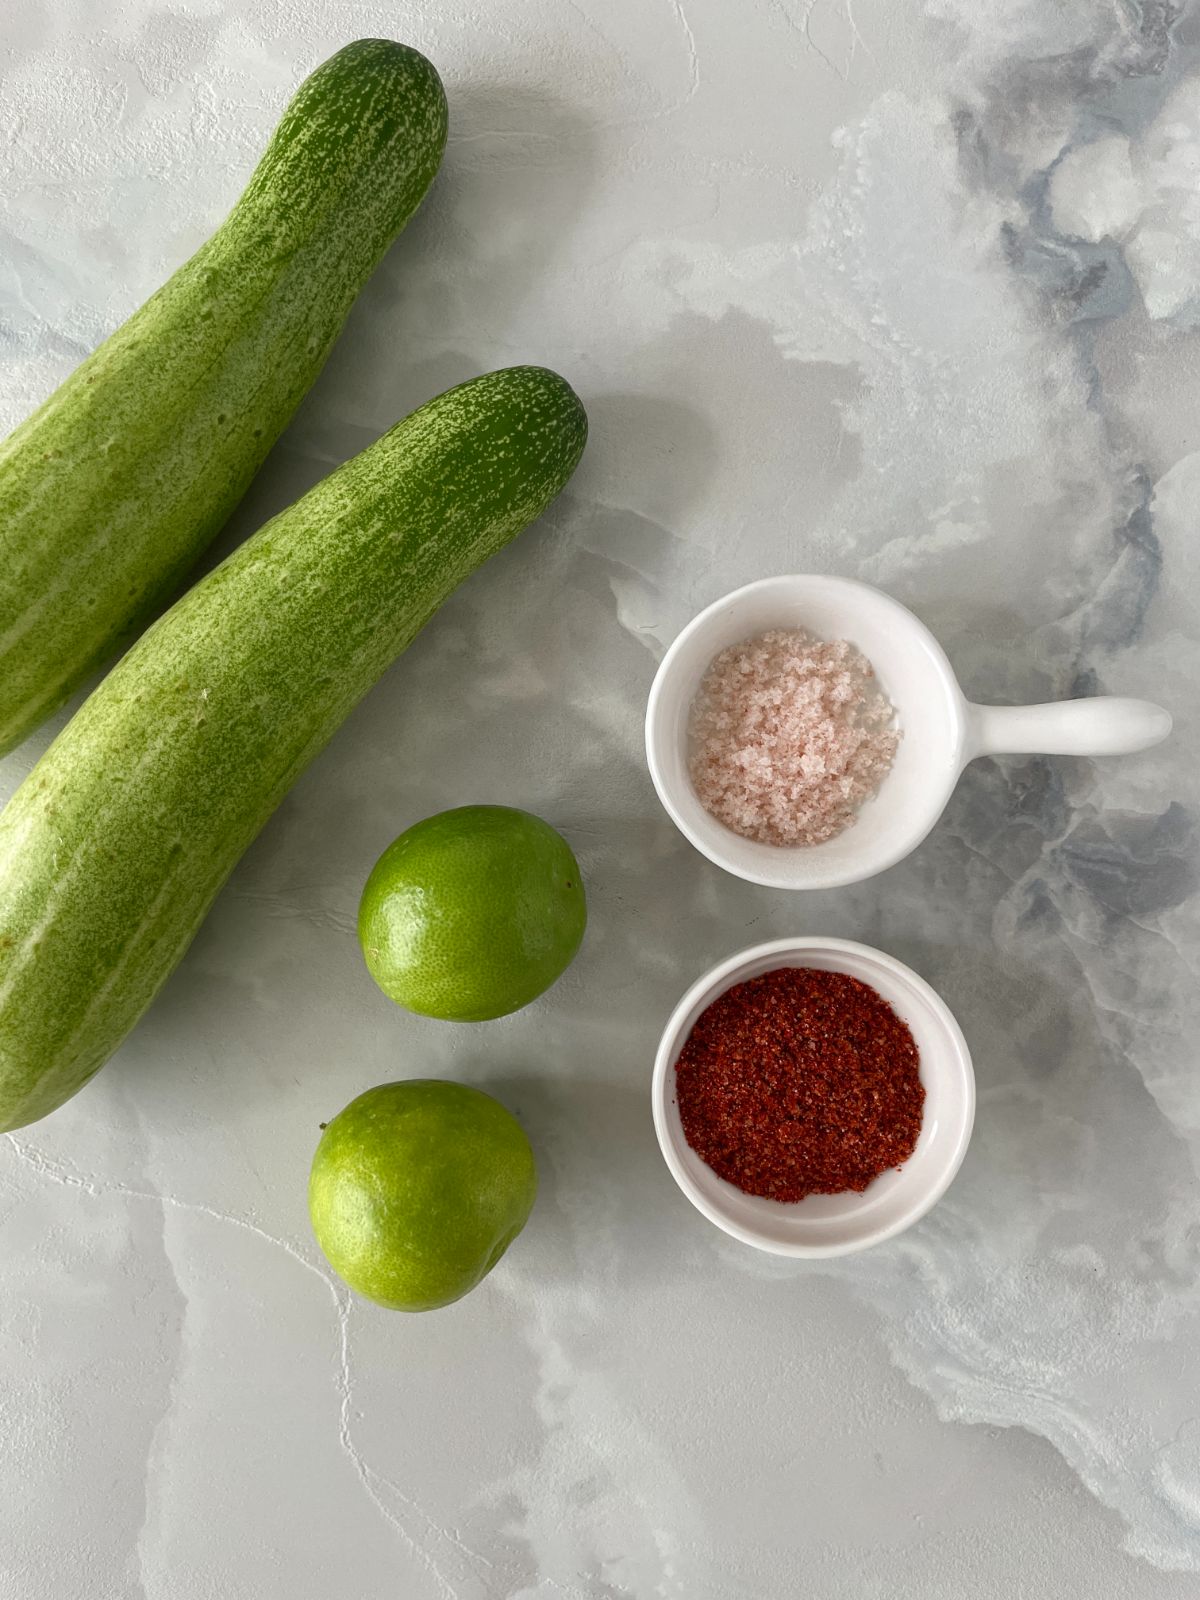 ingredients for the cucumber and tajin salad